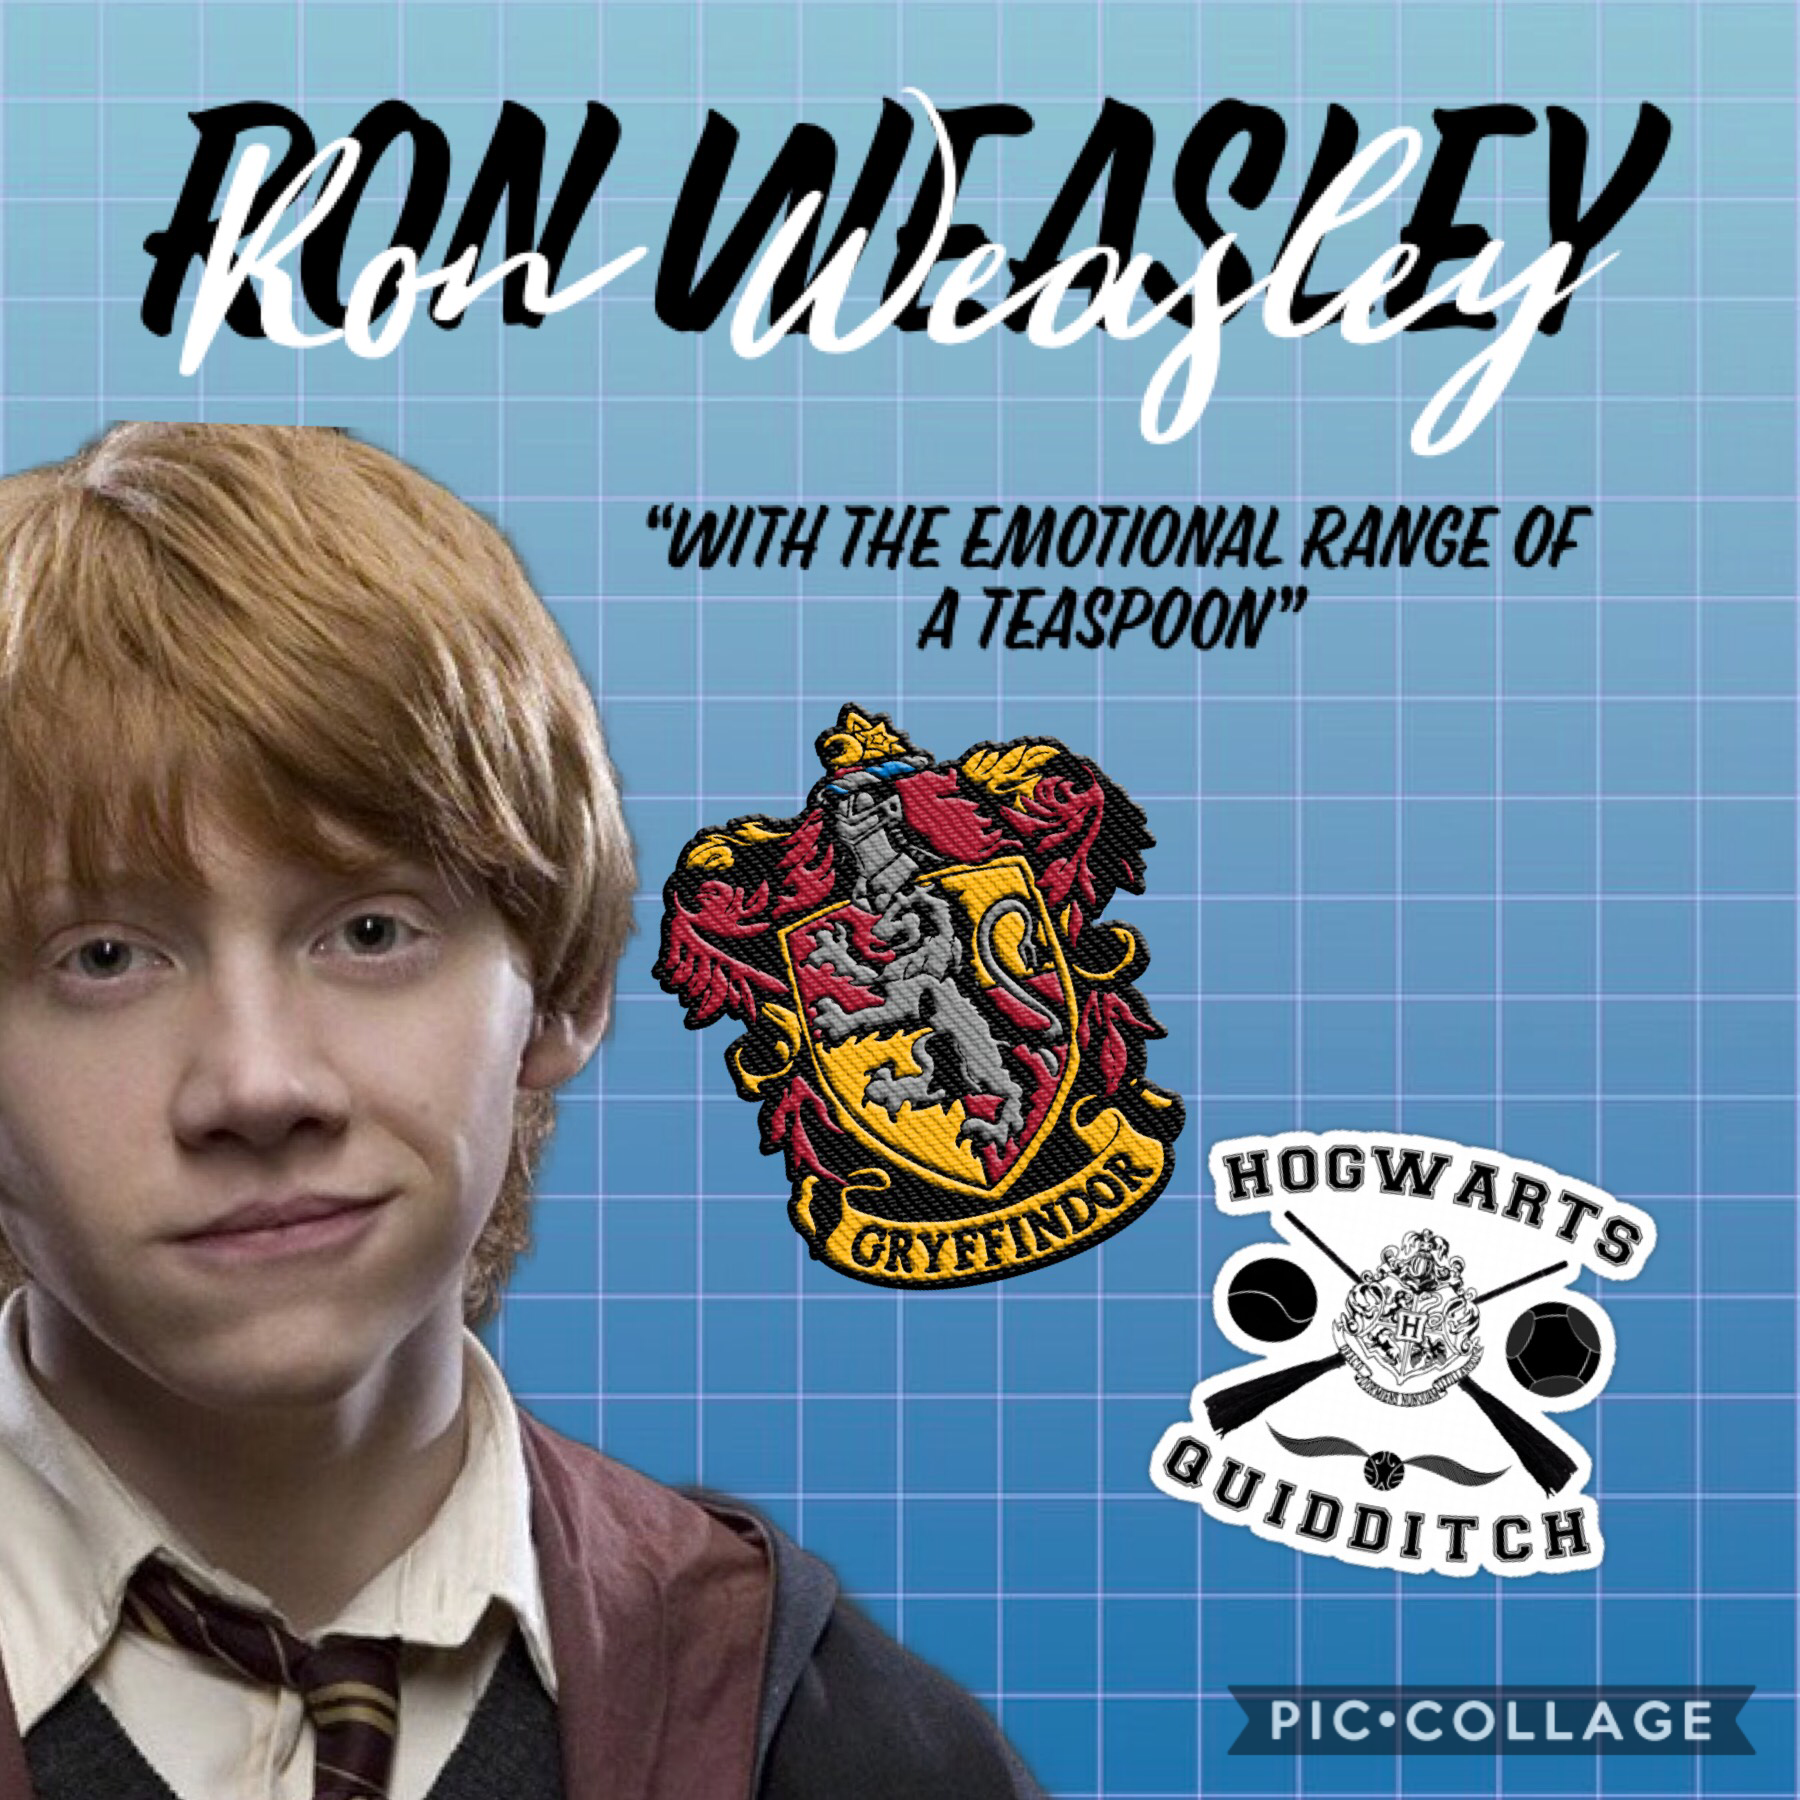 🦄TAPPY🦄

What would we do without Ron, a  proud Weasley,Gryffindor and a great best friend.

Should I continue with these Harry Potter collages?